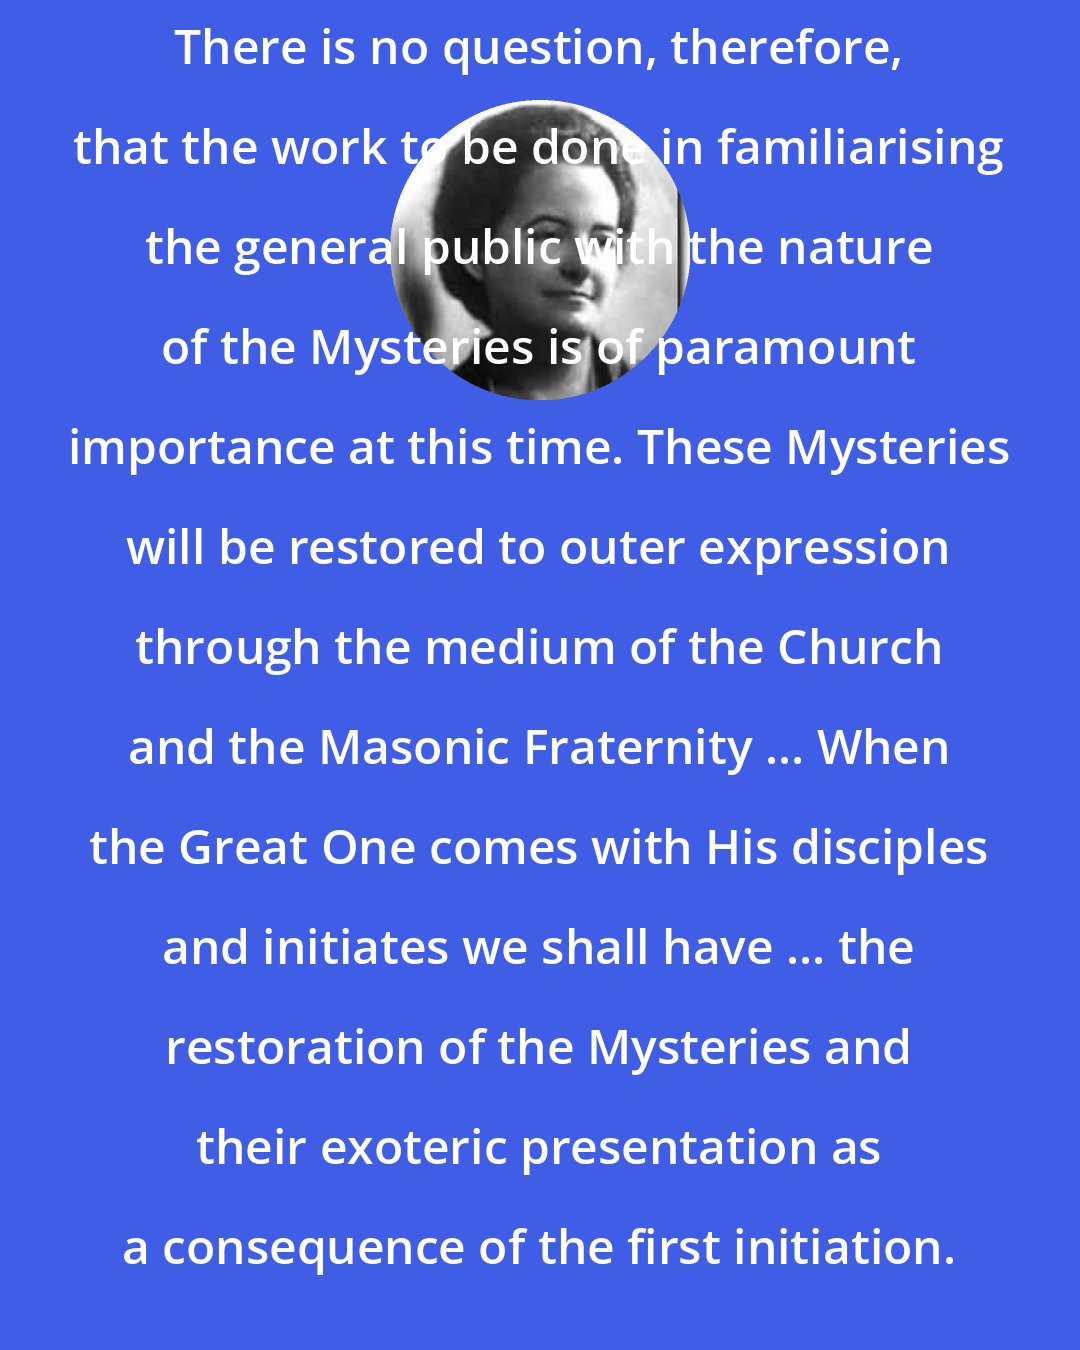 Alice Bailey: There is no question, therefore, that the work to be done in familiarising the general public with the nature of the Mysteries is of paramount importance at this time. These Mysteries will be restored to outer expression through the medium of the Church and the Masonic Fraternity ... When the Great One comes with His disciples and initiates we shall have ... the restoration of the Mysteries and their exoteric presentation as a consequence of the first initiation.